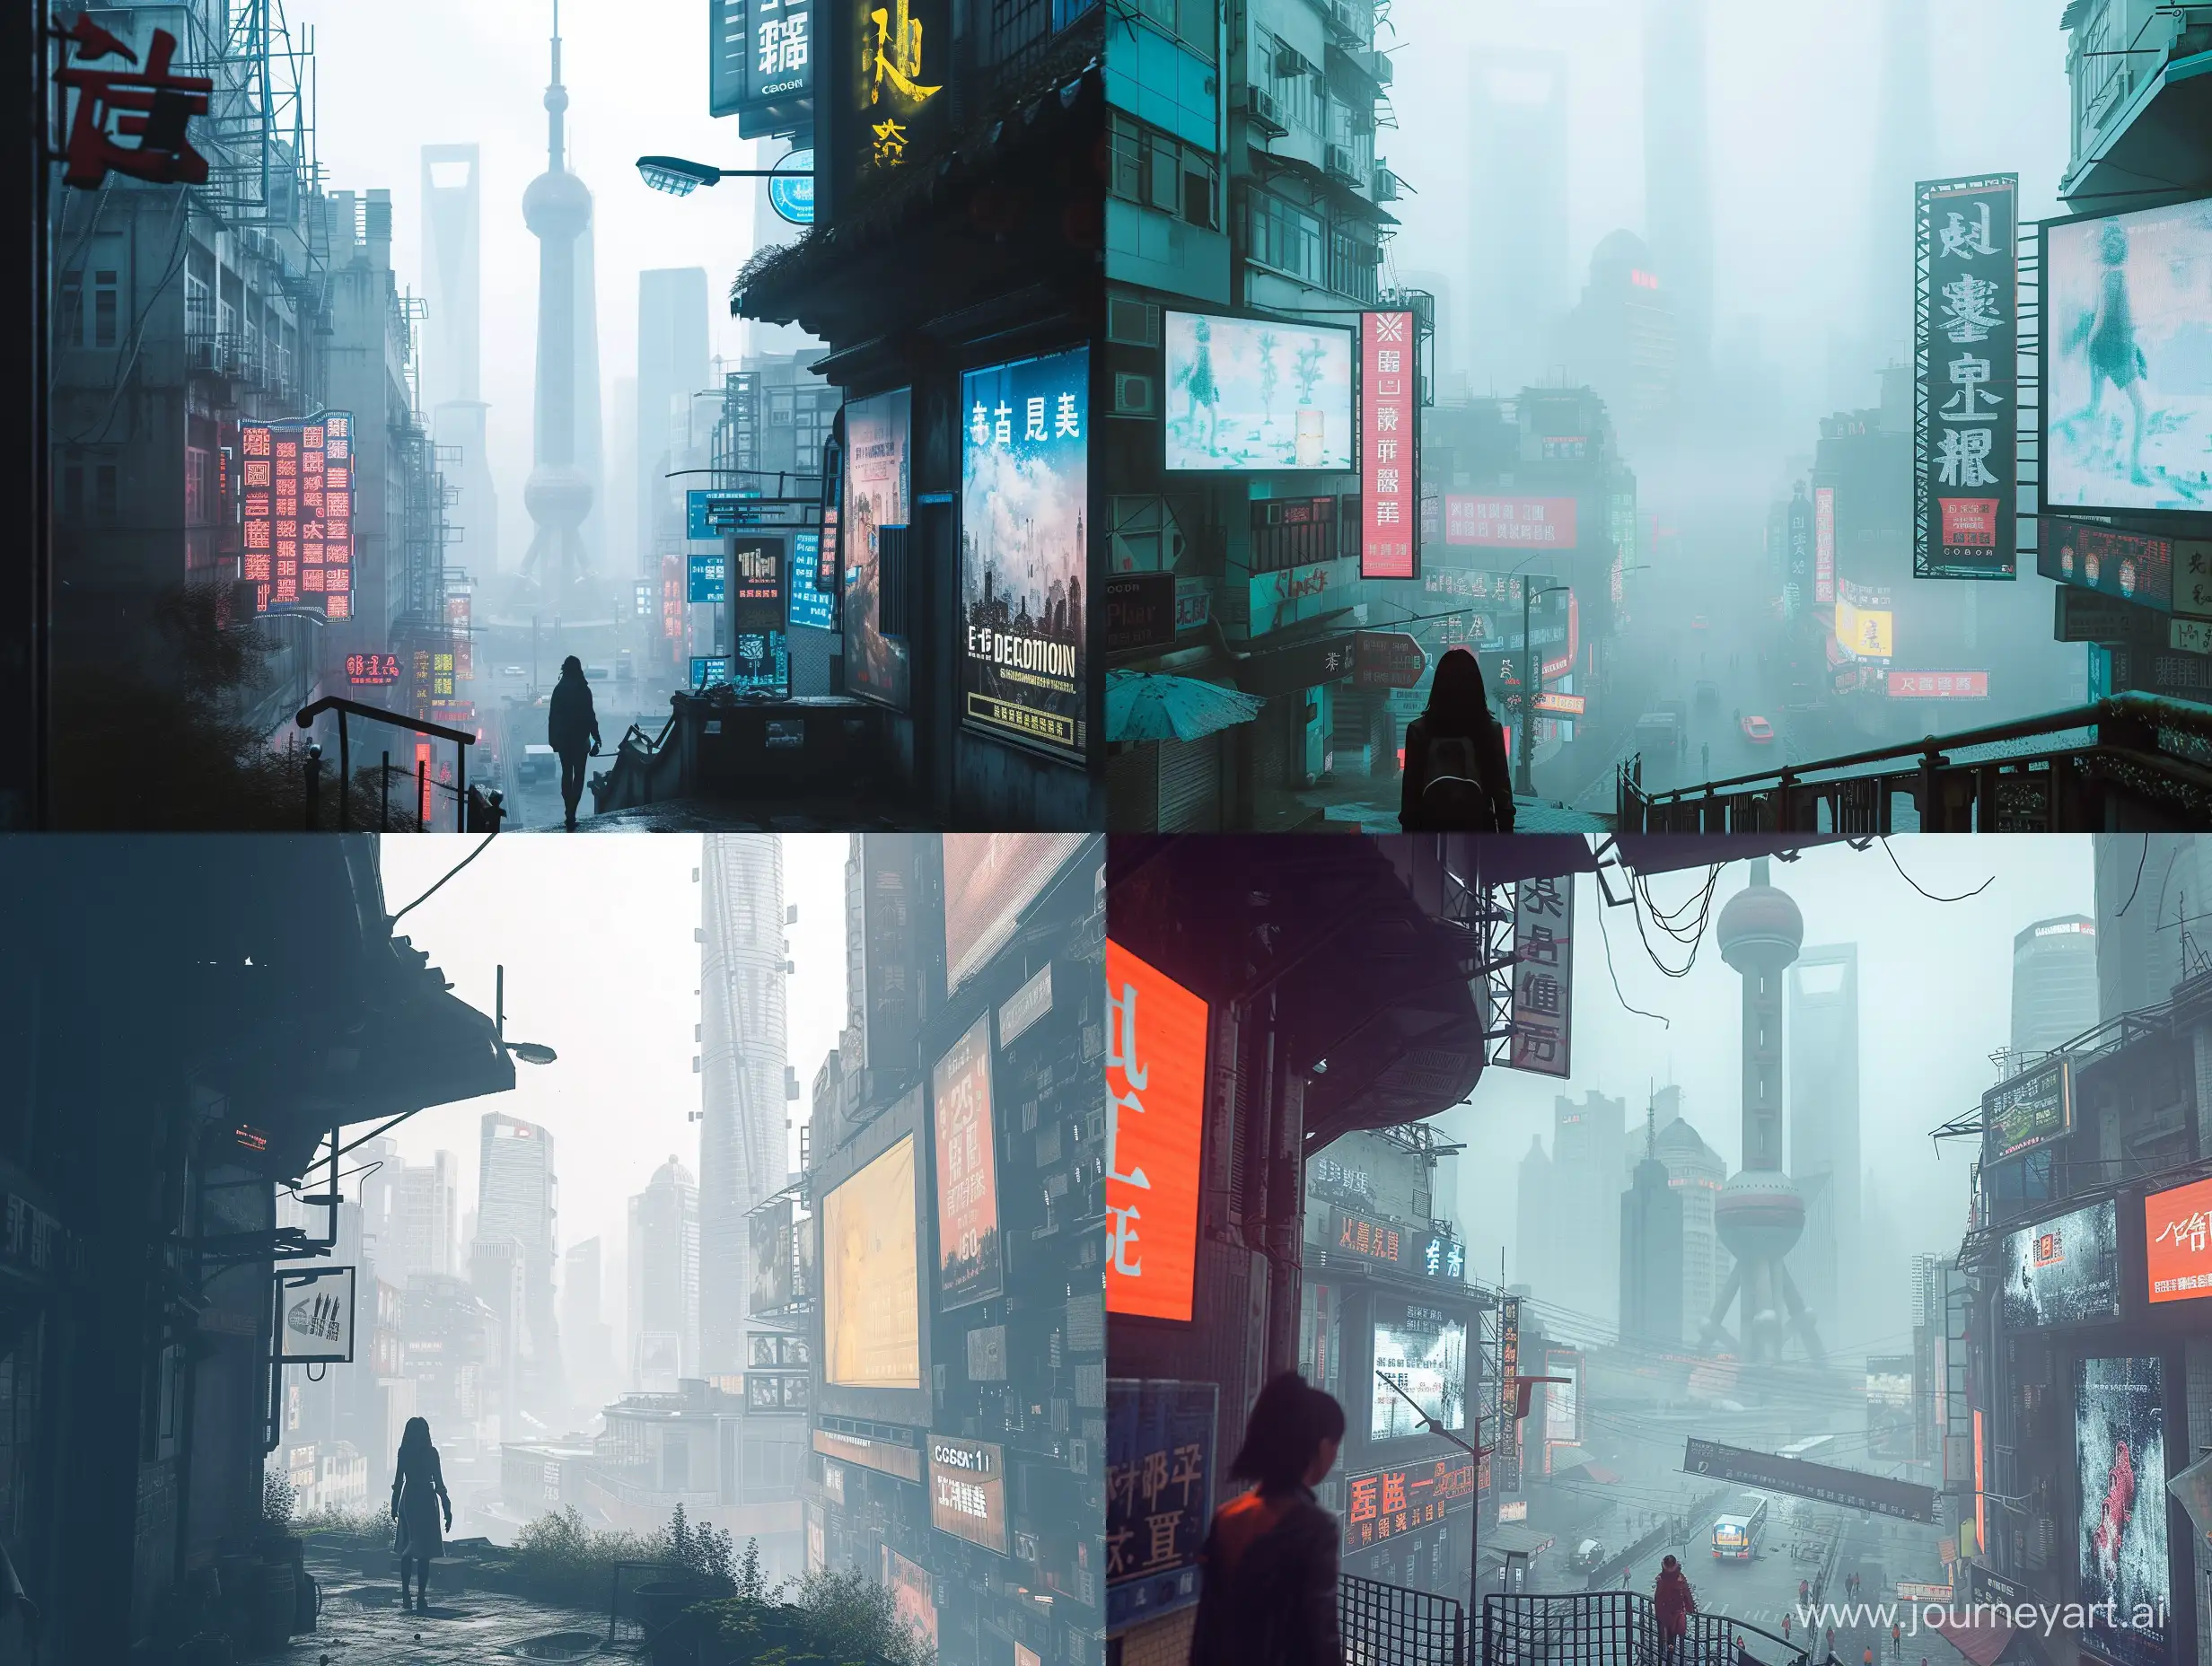 a bustling large Procedural shanghai cityscape, the photo is bathed in natural lighting, relaxing setting. Shot in 4k with a high end DSLR camera. such as a Canon EOS R5 with a 50mm f/1. 2 lens, creative architectures, full view, skyline, vivid, foggy, dystopian, science fiction, skyline, billboards, nature, year 2100 futuristic, a cyberpunk woman walking through a alleyway looking at the viewer, landscape, environment,
